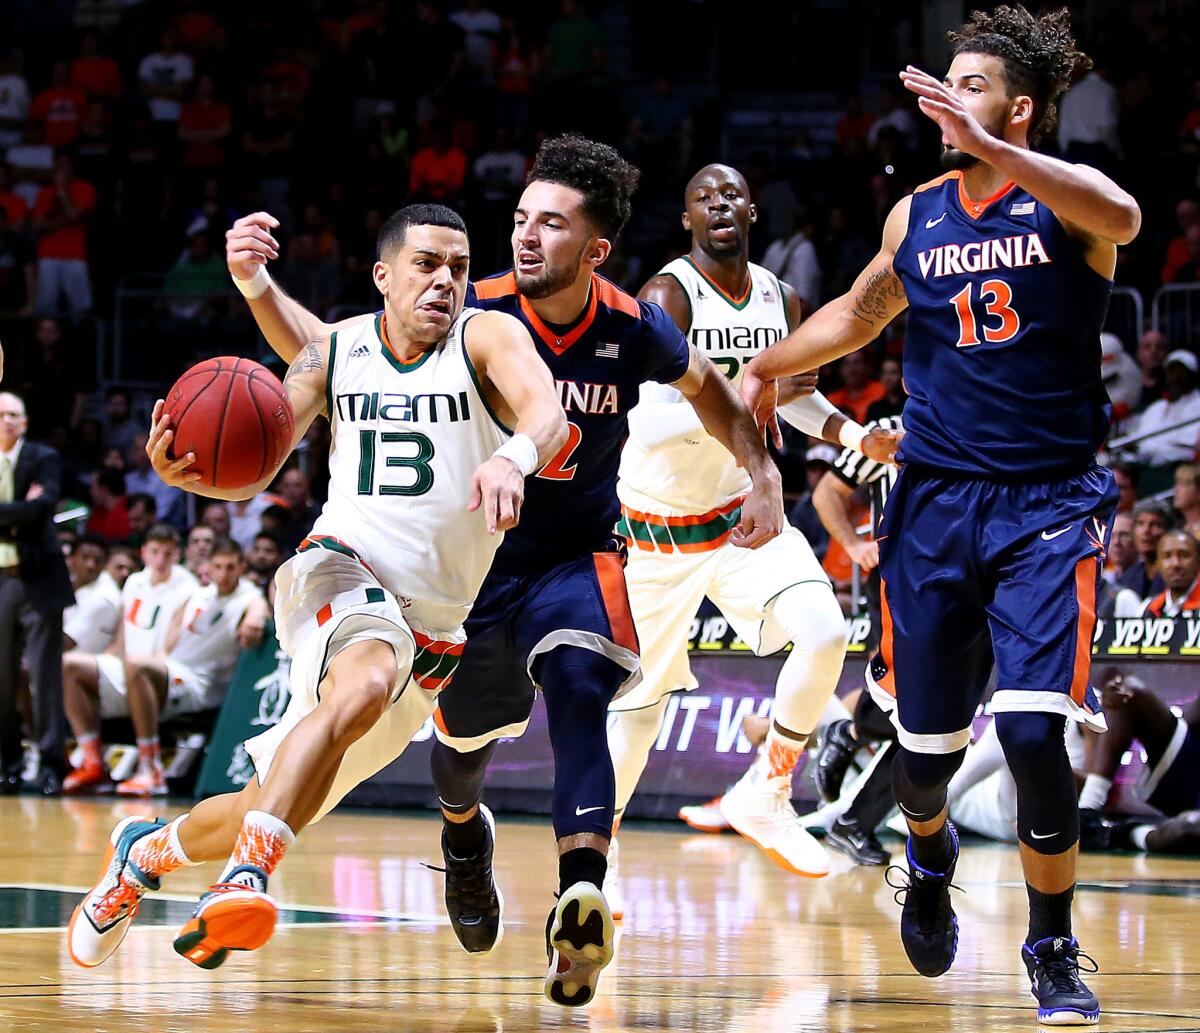 Miami guard Angel Rodriguez (13) drives to the basket while being defended by Virginia's London Perrantes (32) and Anthony Gill (13).